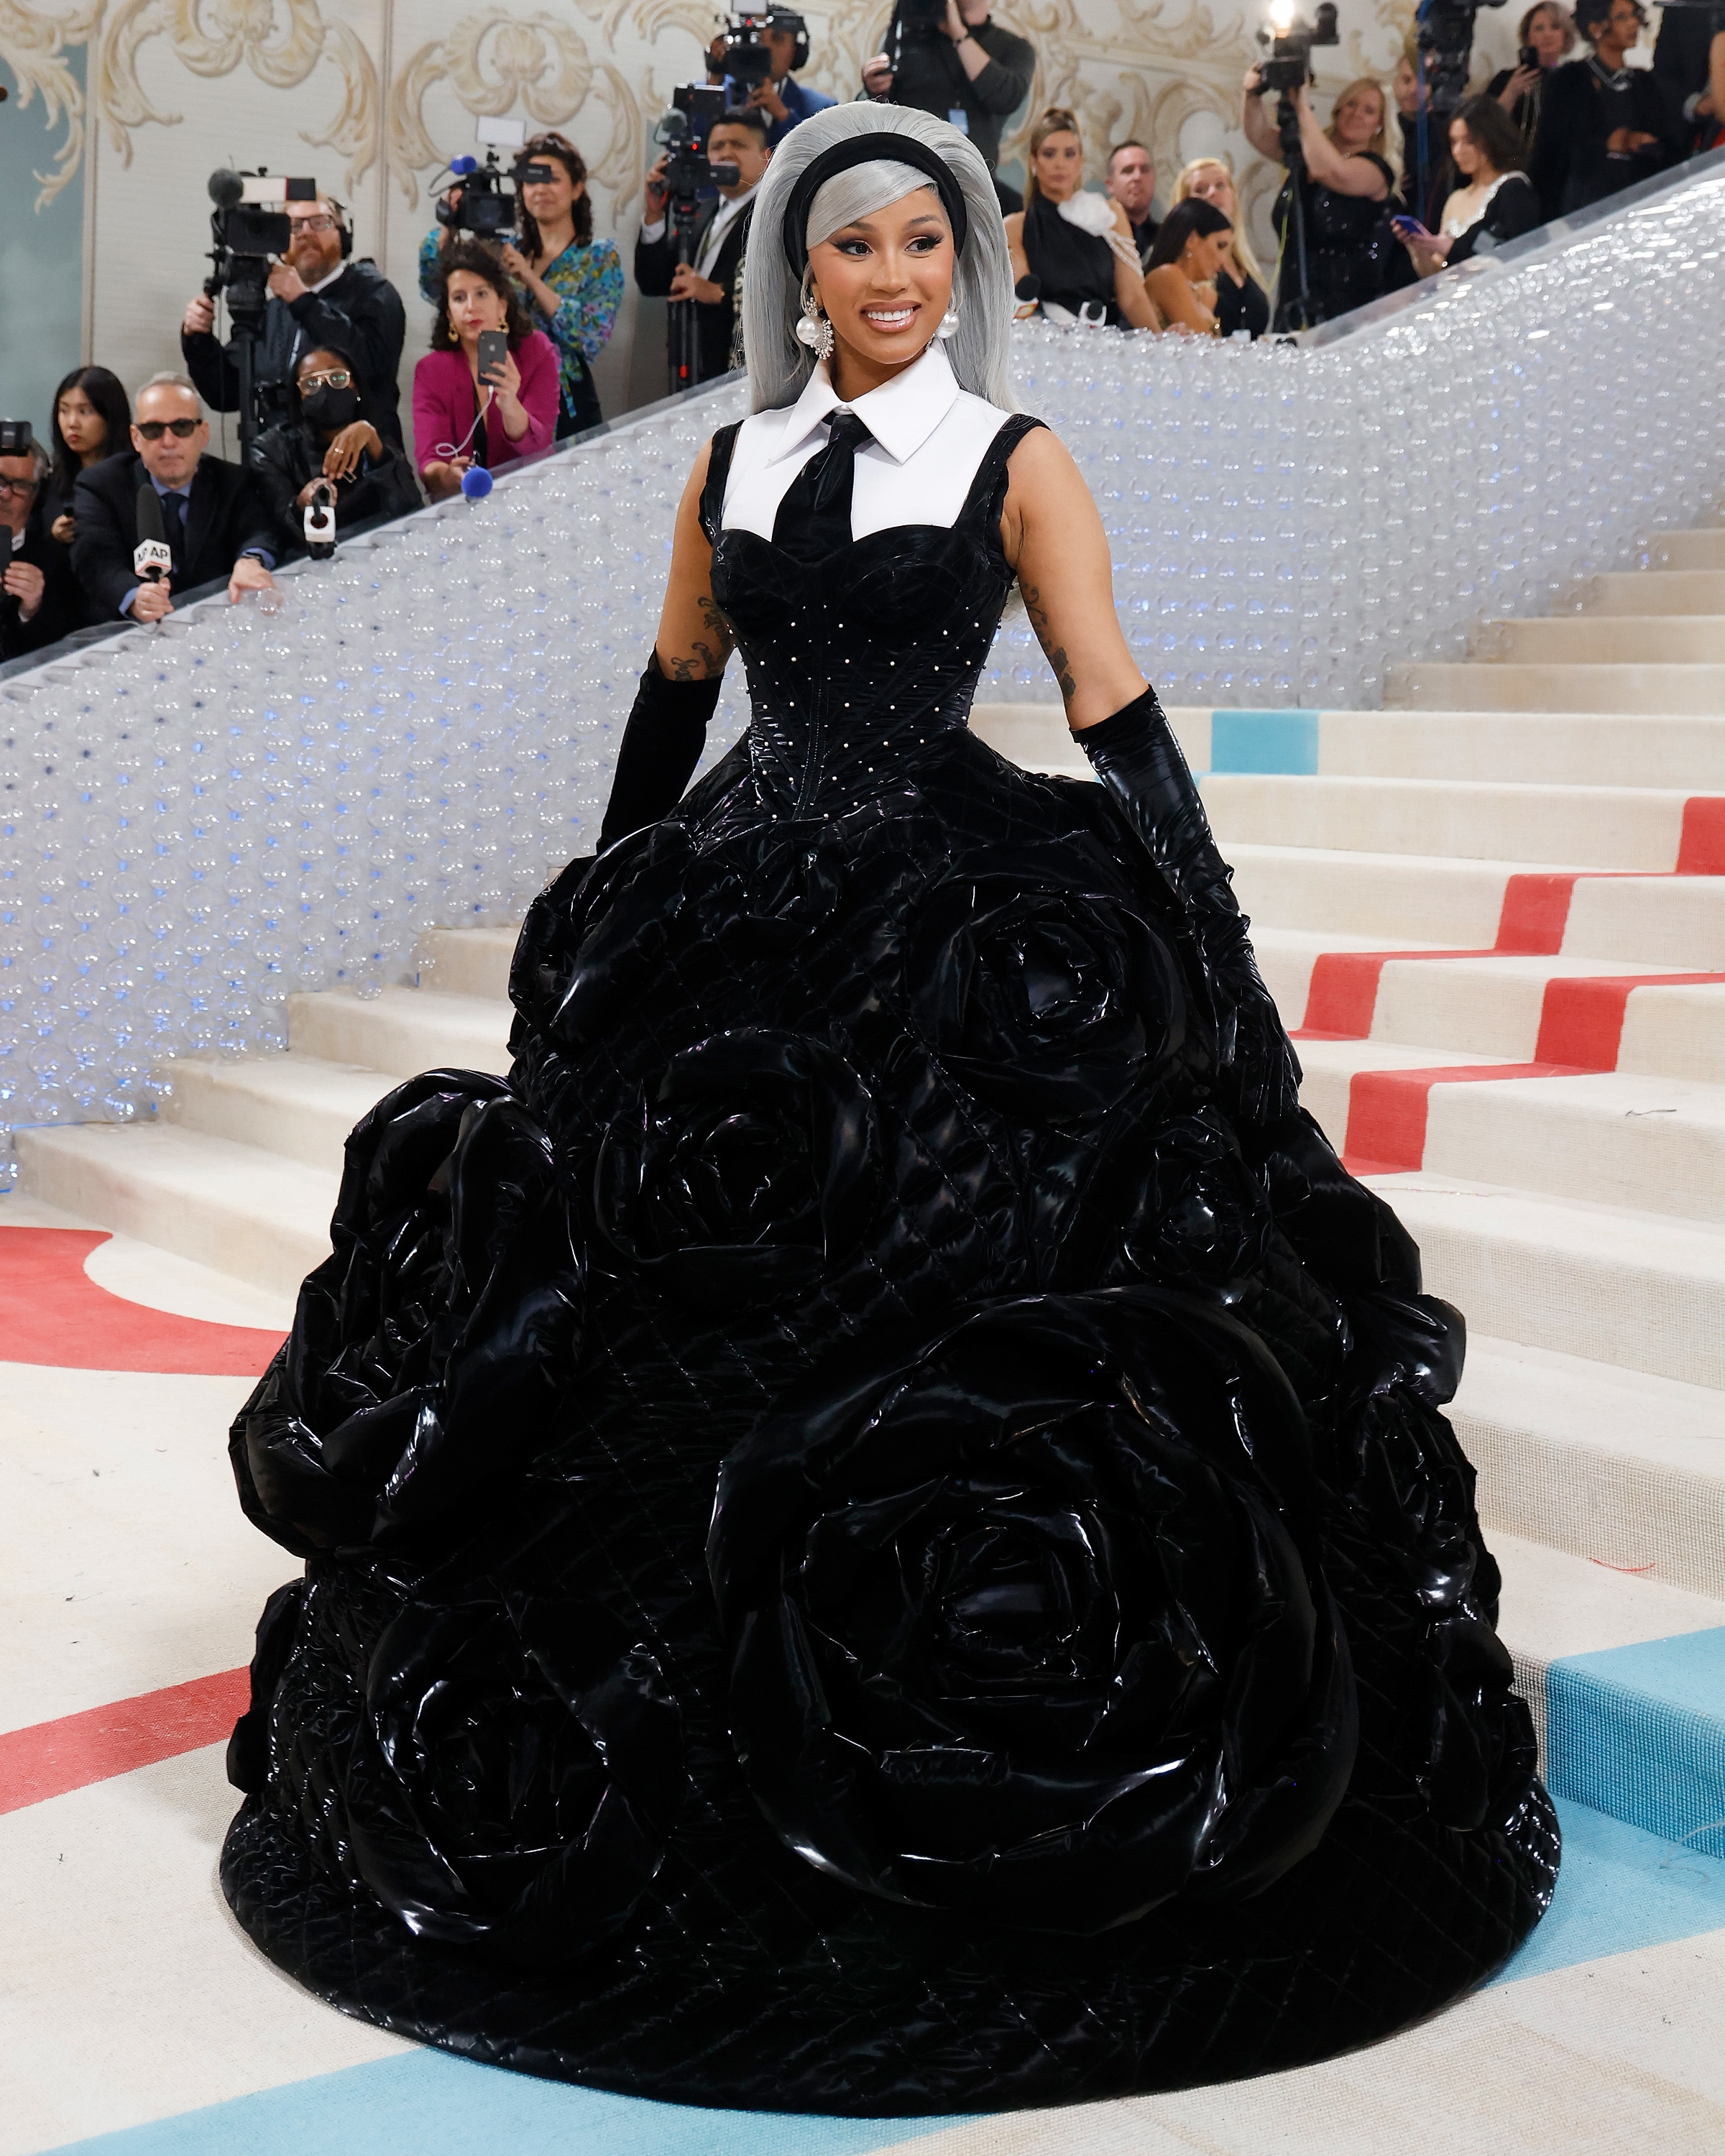 Cardi B in a voluminous black gown with a white collar, posing on stairs at an event